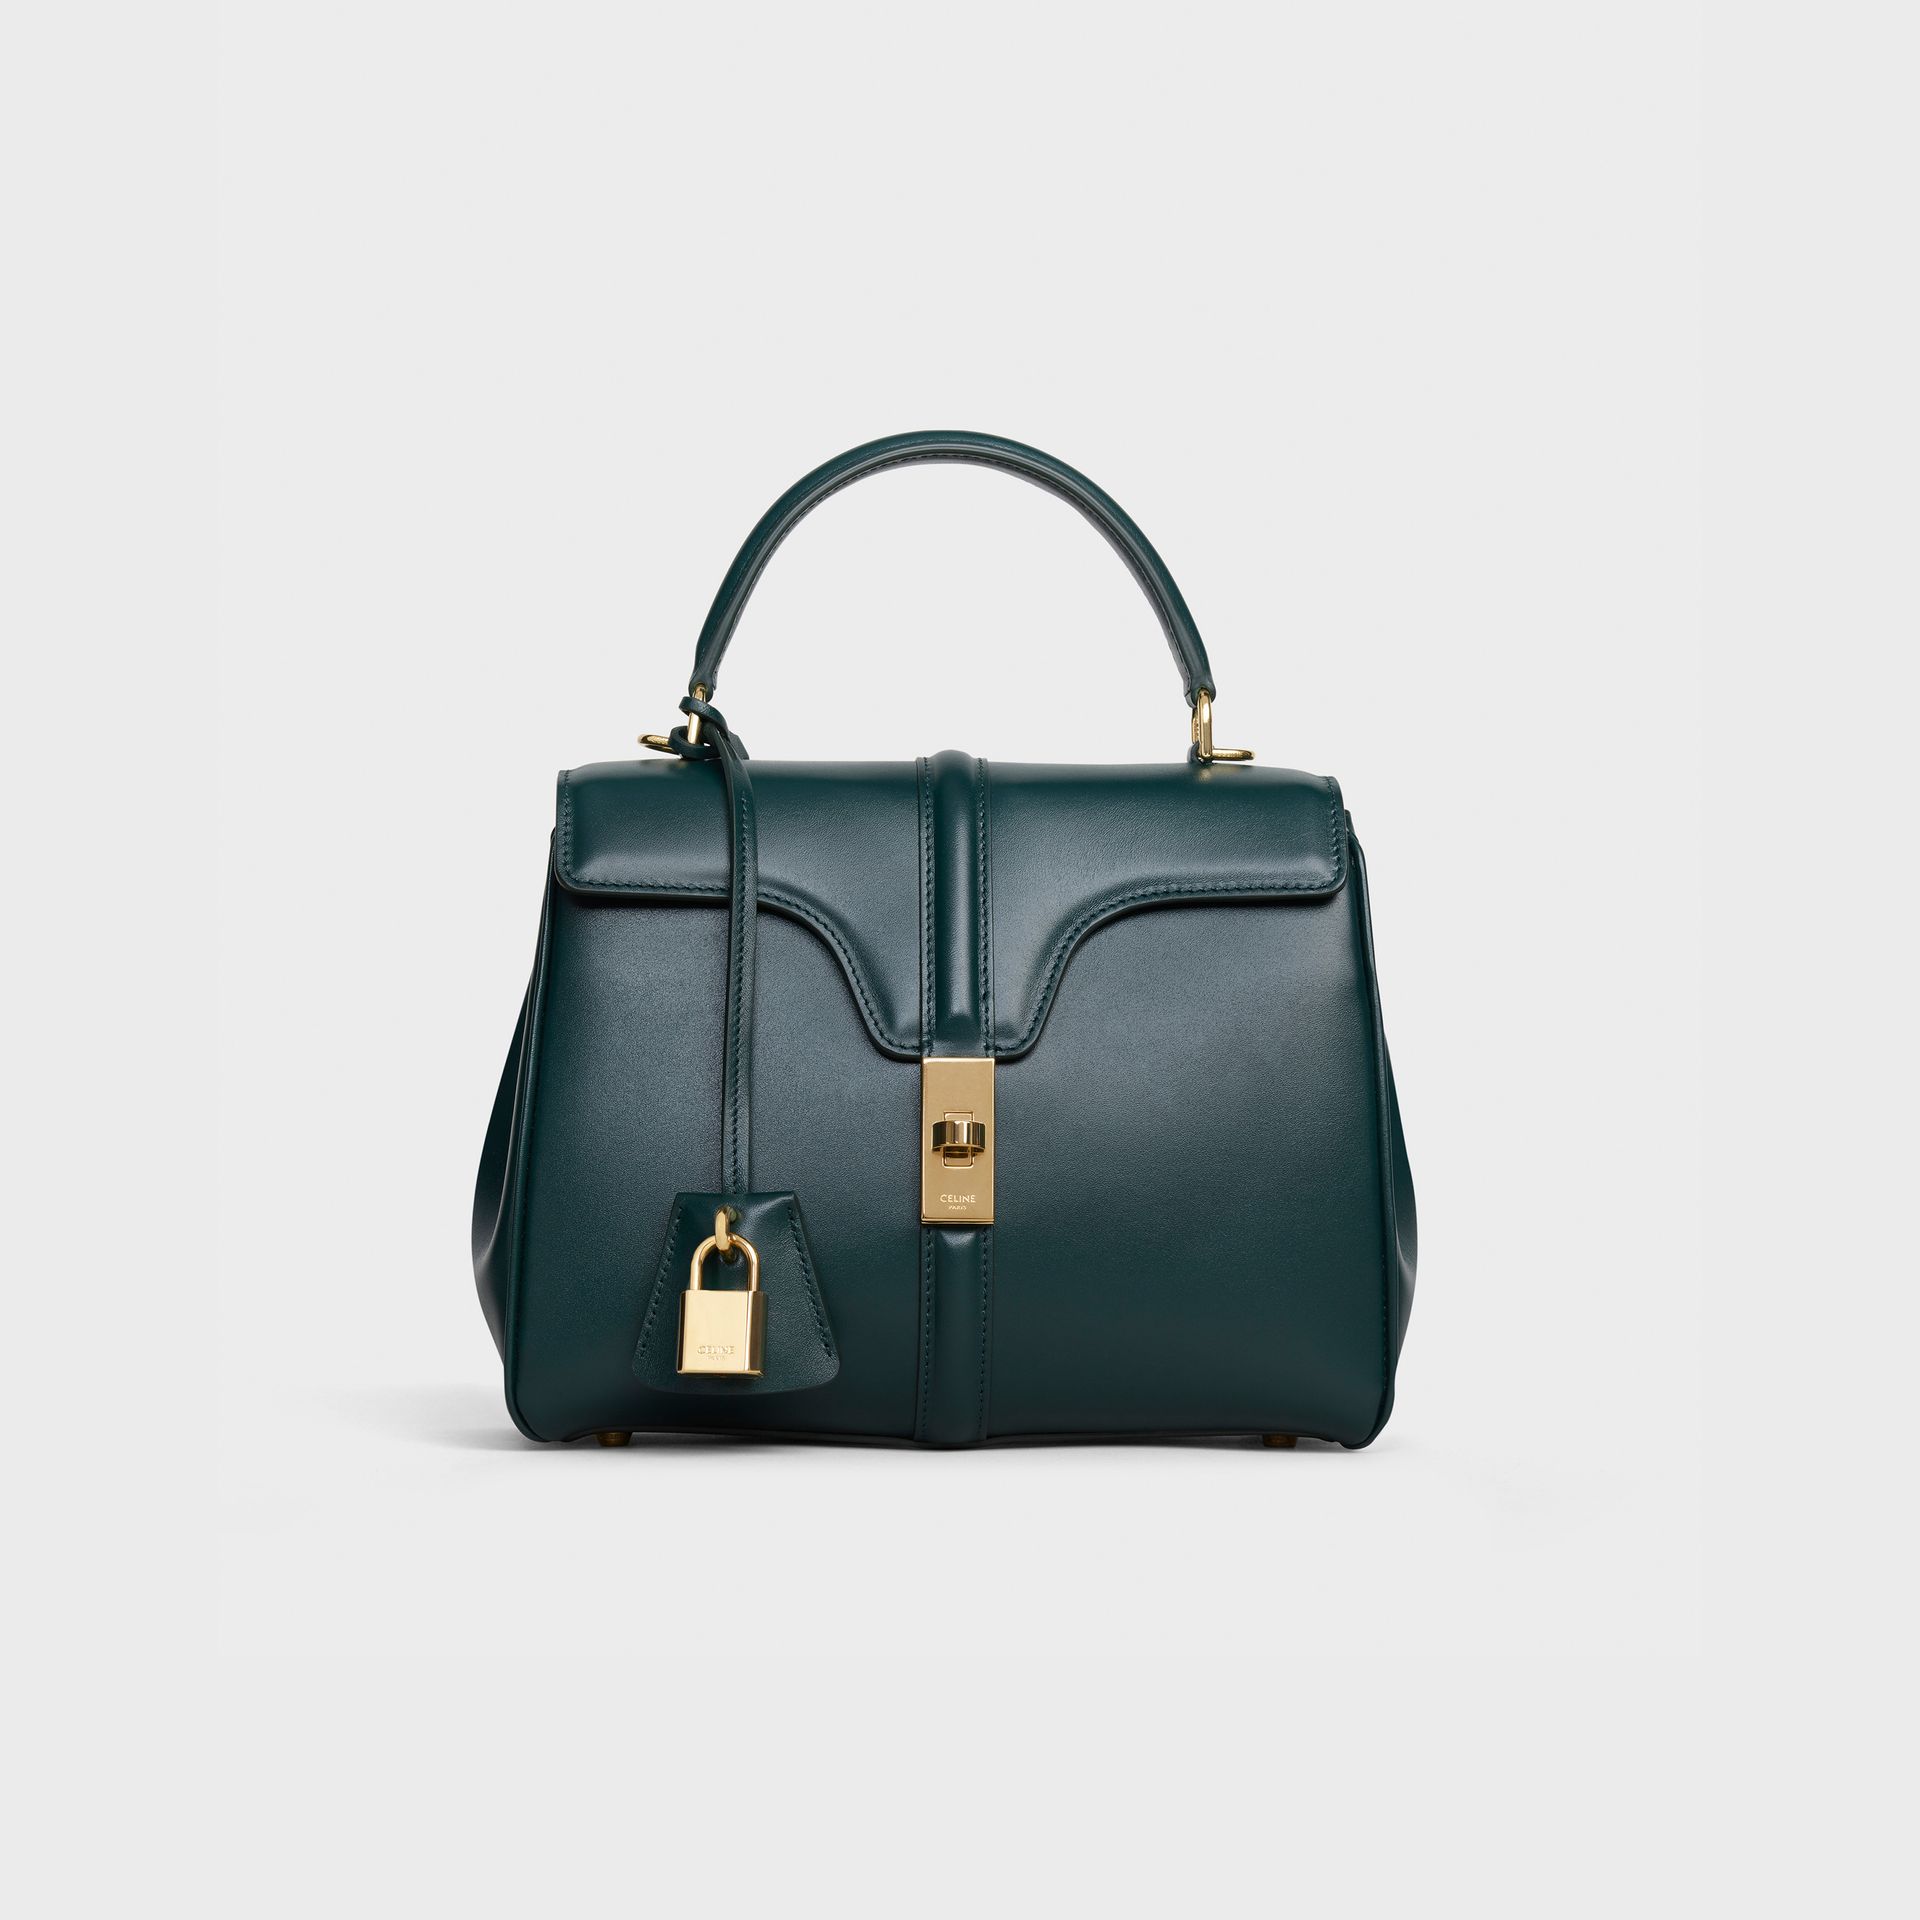 The Celine 16 Strap Bag Will Be Hugely Popular in 2021 | Who What Wear